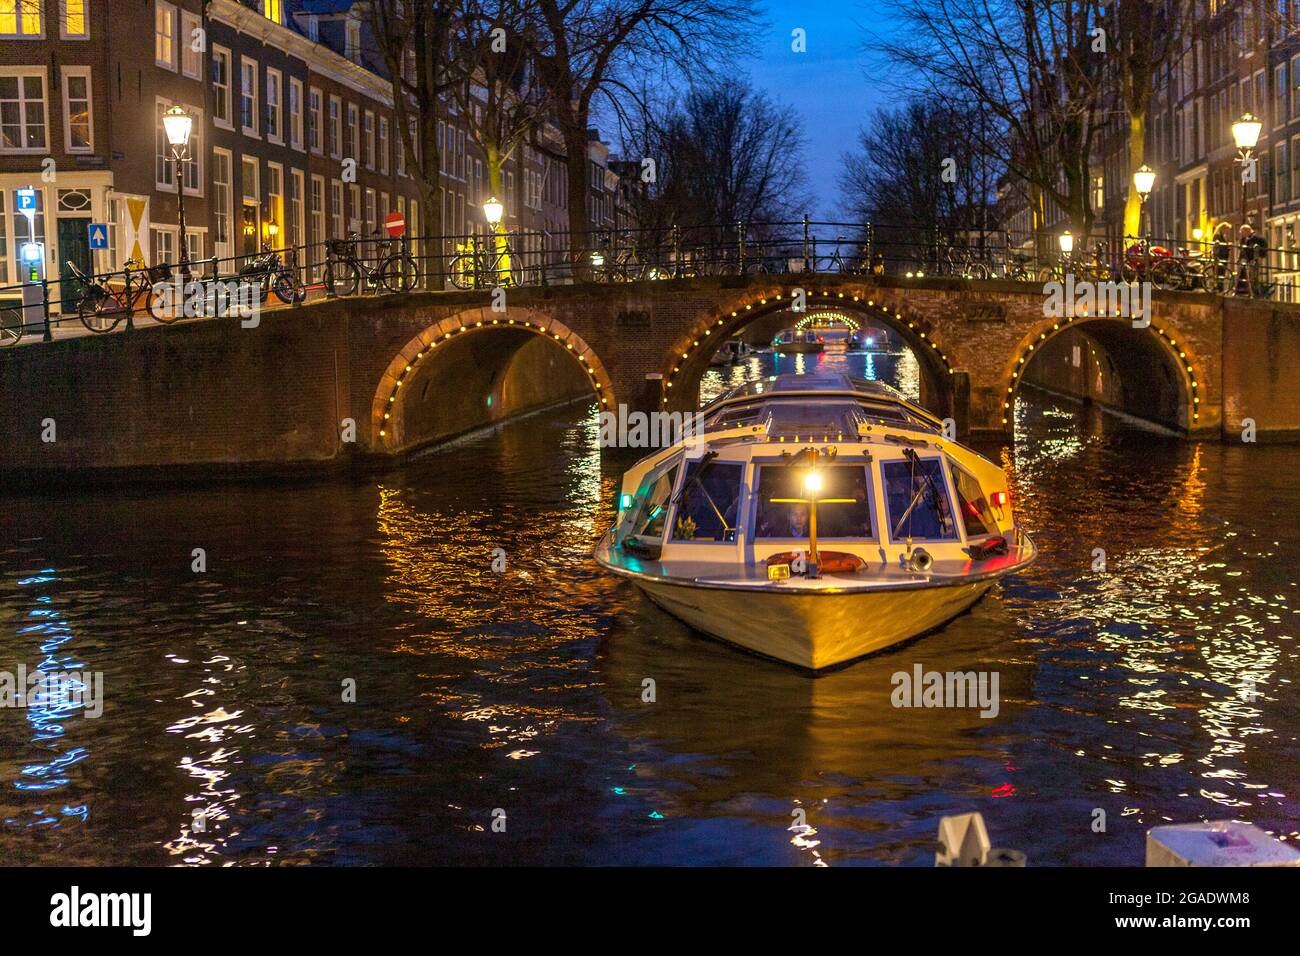 Tourist canal boat cruise and bridge with arches, illuminated at night, Herengracht and Leidsegracht canals, Amsterdam Stock Photo